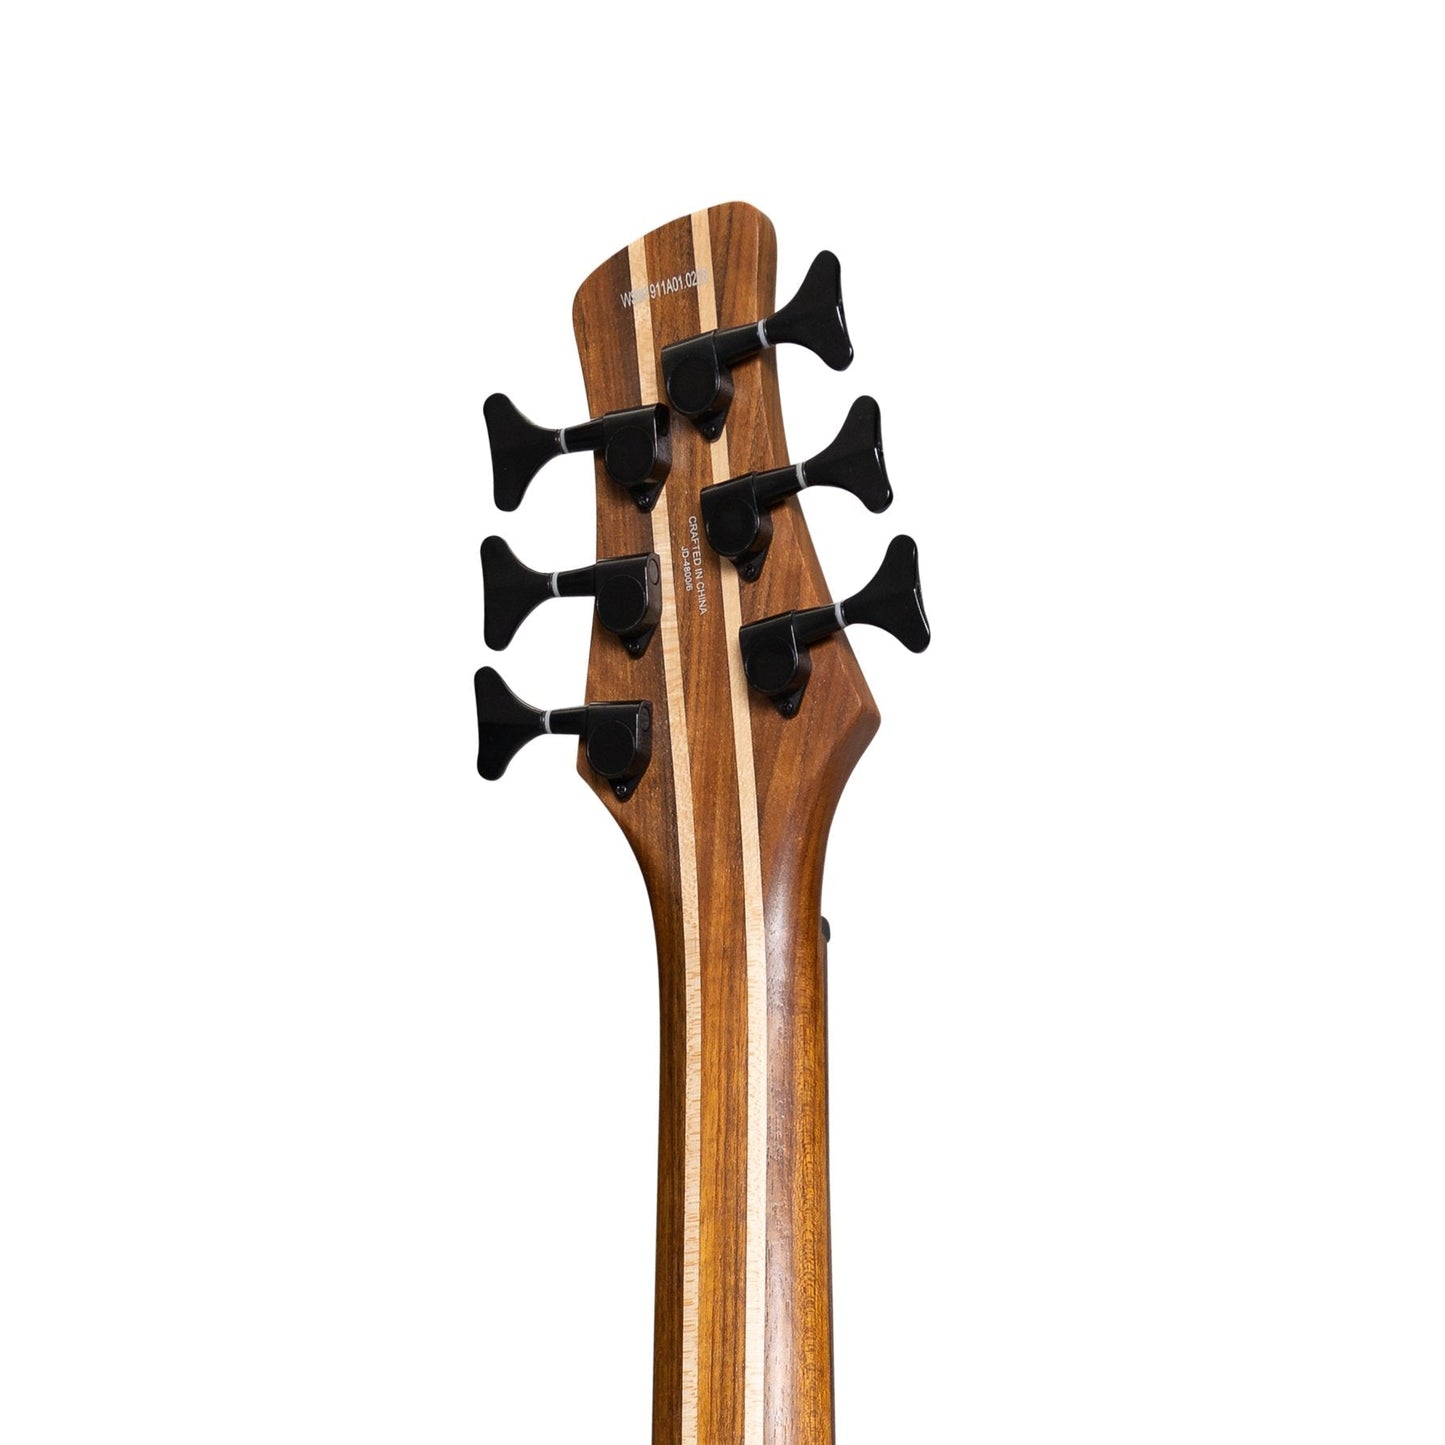 J&D Luthiers '48 Series' 6-String Contemporary Active Electric Bass Guitar (Natural Satin)